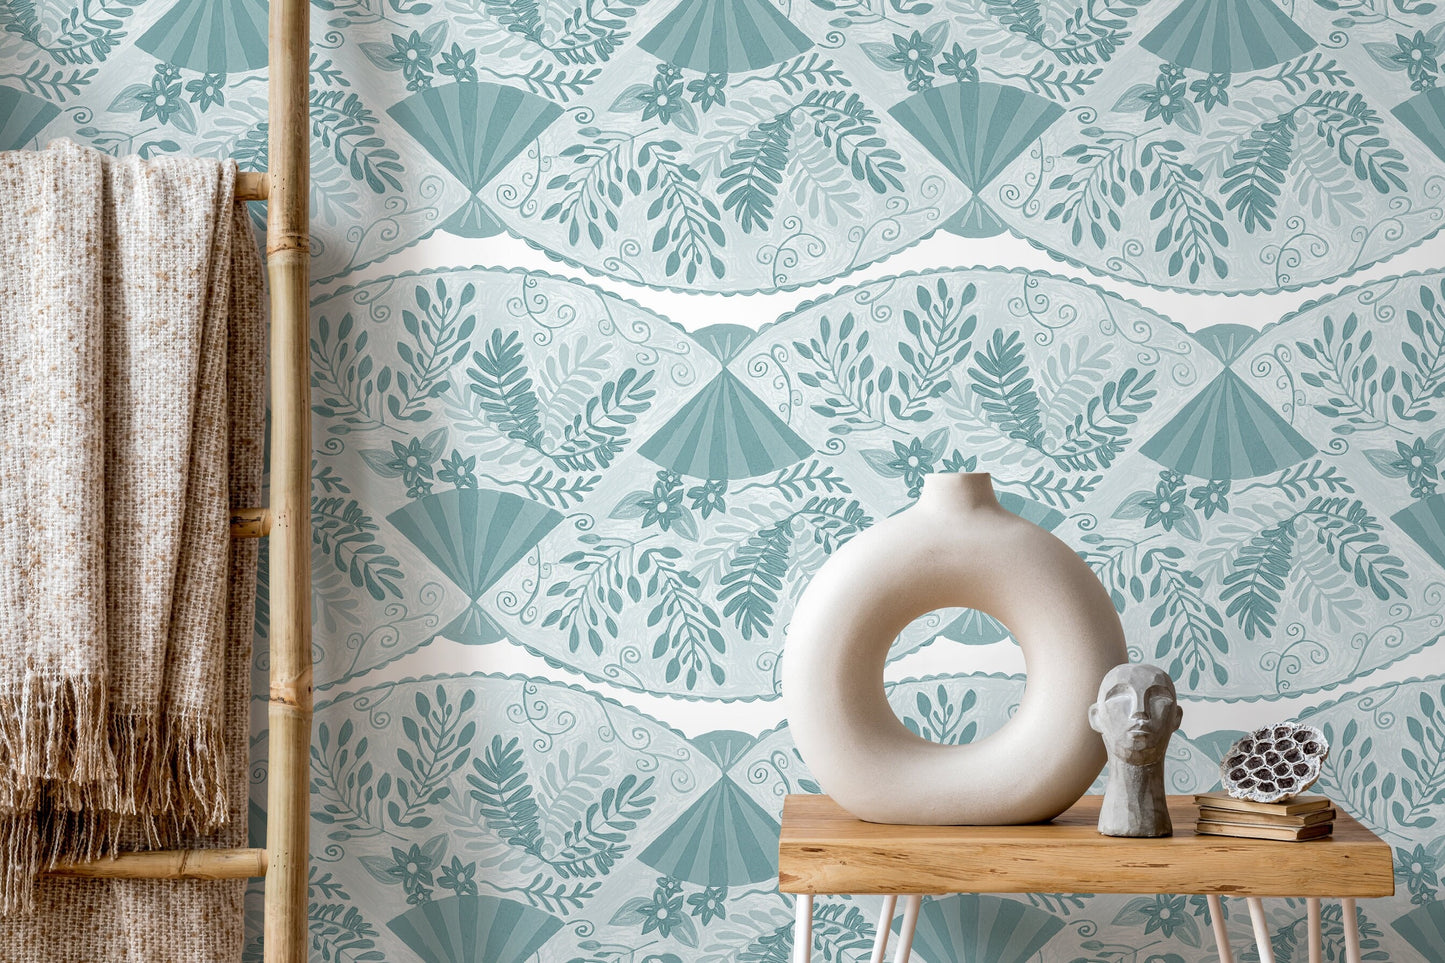 Light Blue Floral and Leaf / Wallpaper Peel and Stick Wallpaper Removable Wallpaper Home Decor Wall Art Wall Decor Room Decor - C946